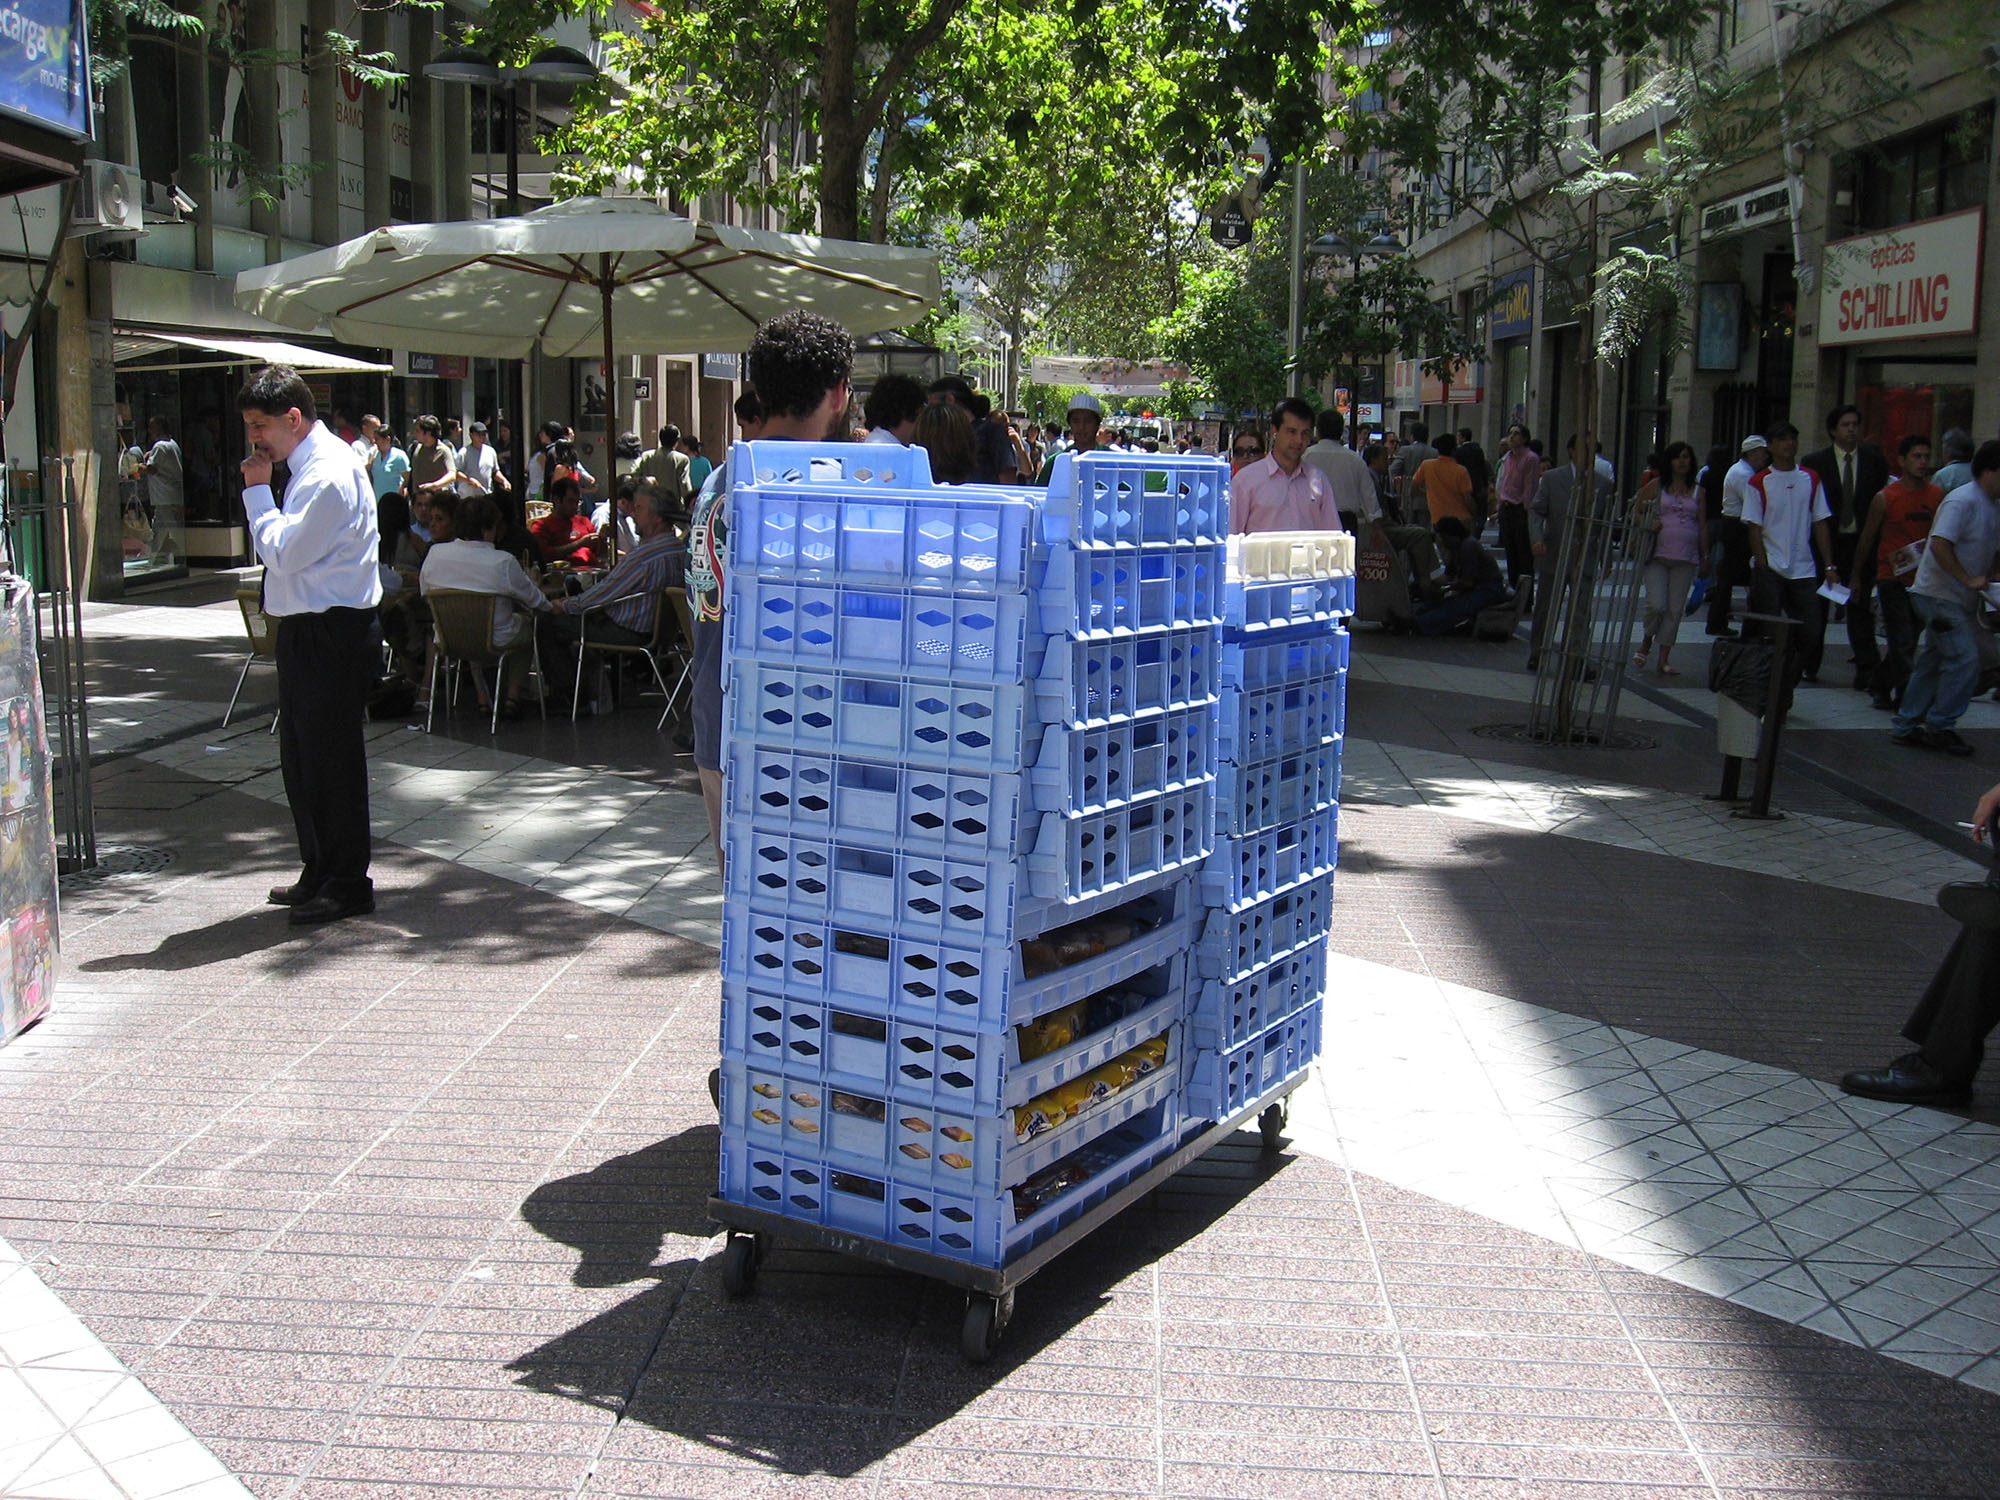 Fig. 22.40 Non-motorized delivery systems, as shown here in Santiago, Chile, can help make transit malls viable for local shop owners.